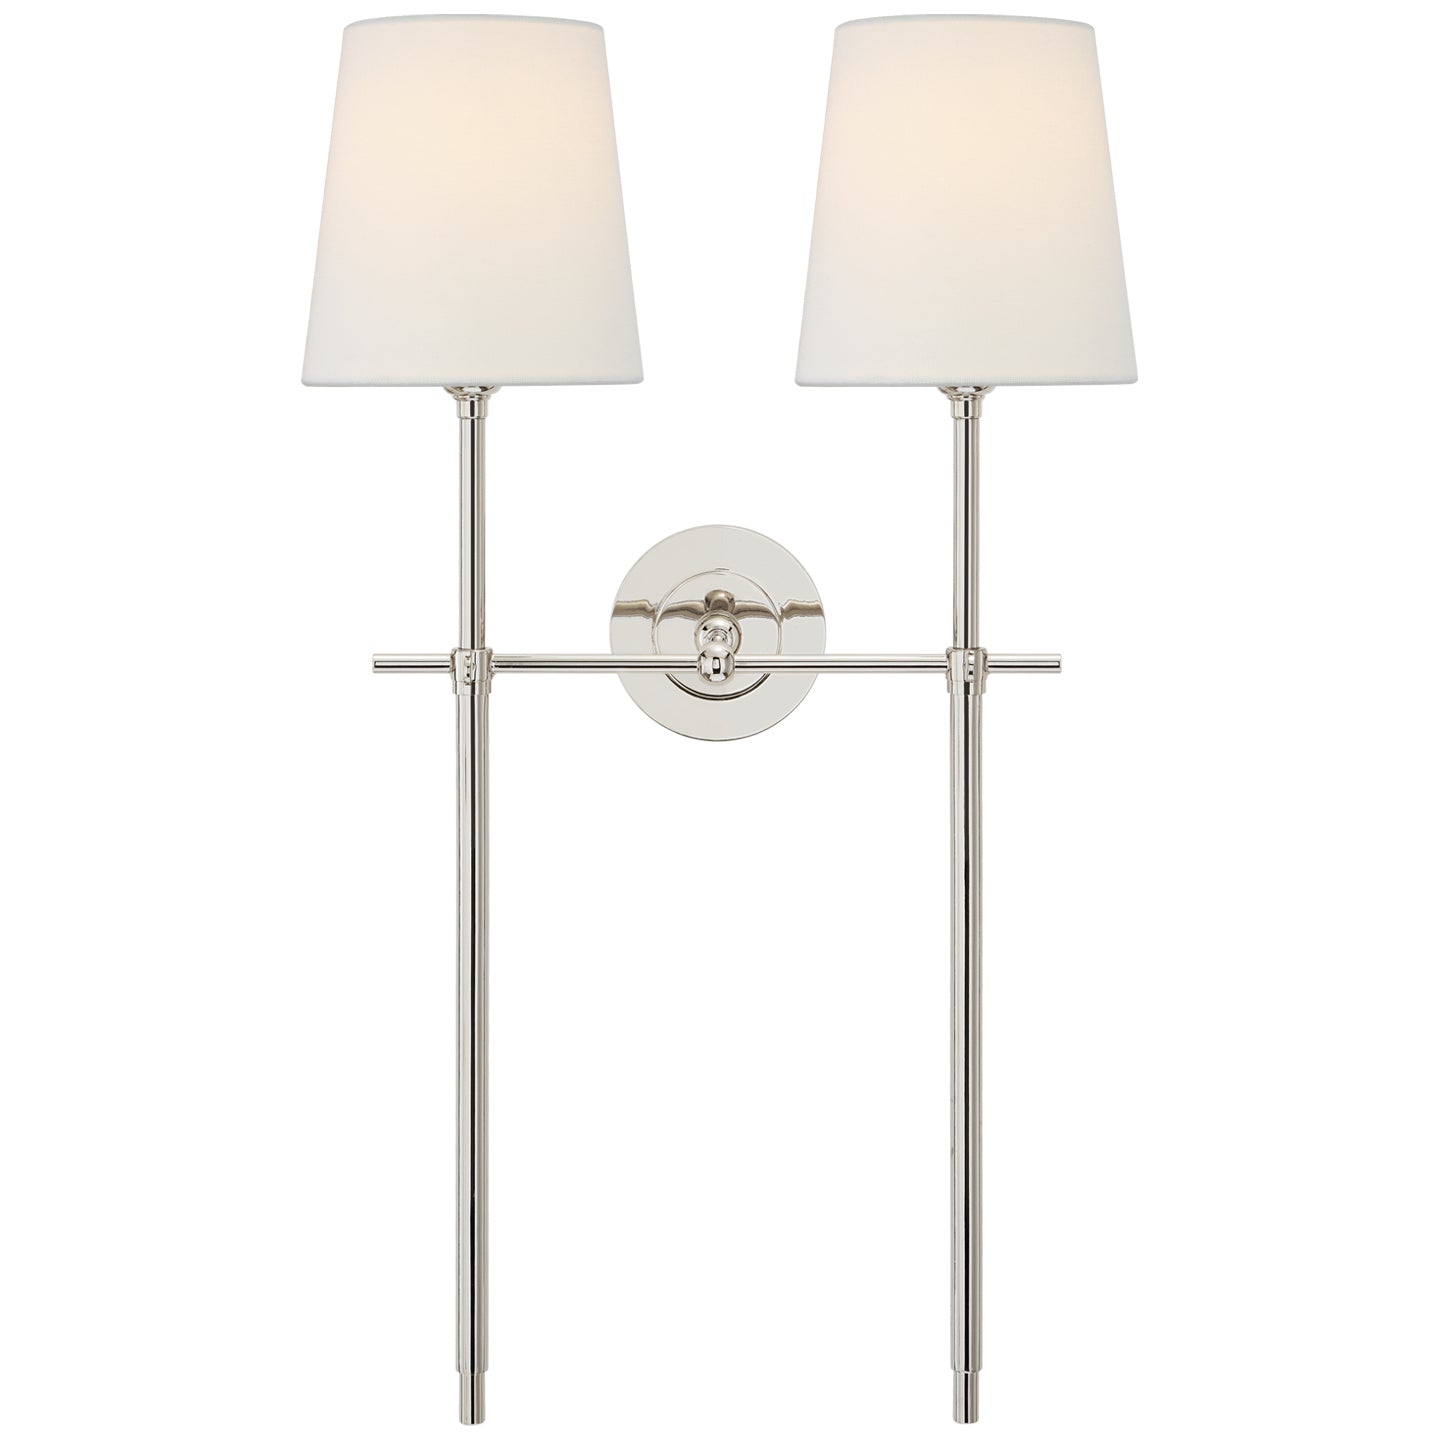 Visual Comfort Signature Canada - Two Light Wall Sconce - Bryant - Polished Nickel- Union Lighting Luminaires Decor